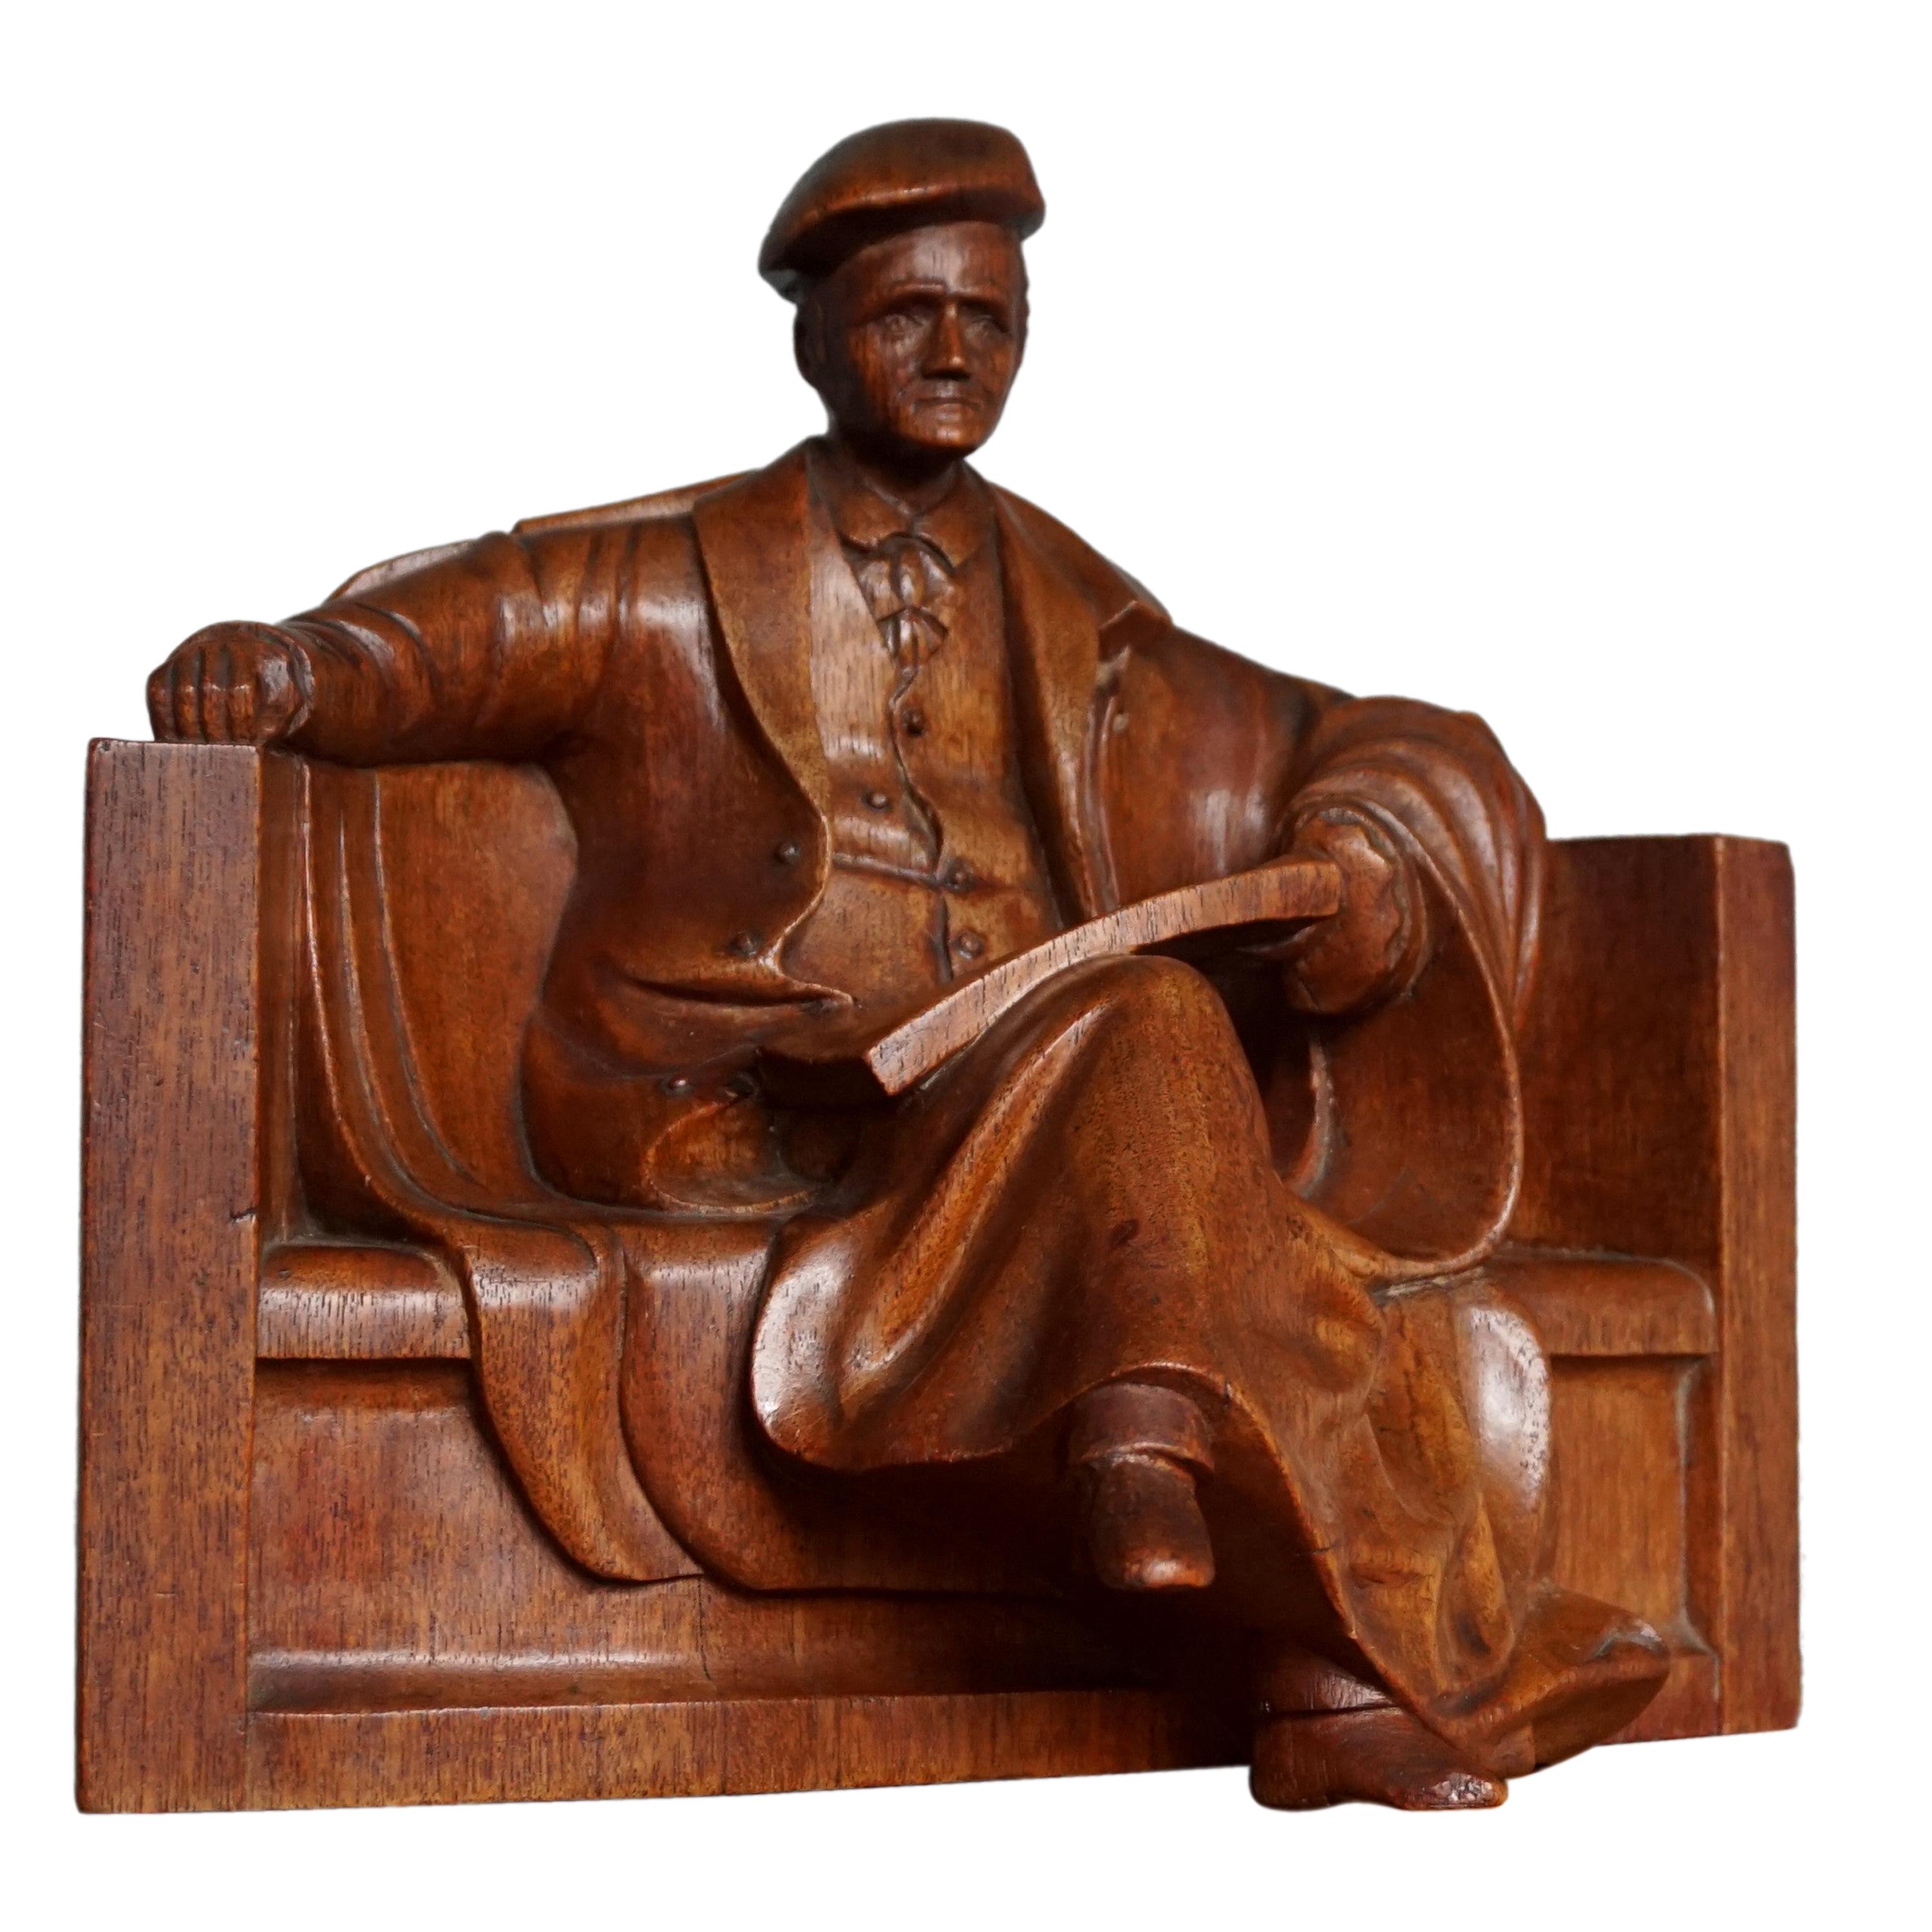 Unique & Stylish Sculpture of a Seated Scholar / Academic Made of Solid Teakwood